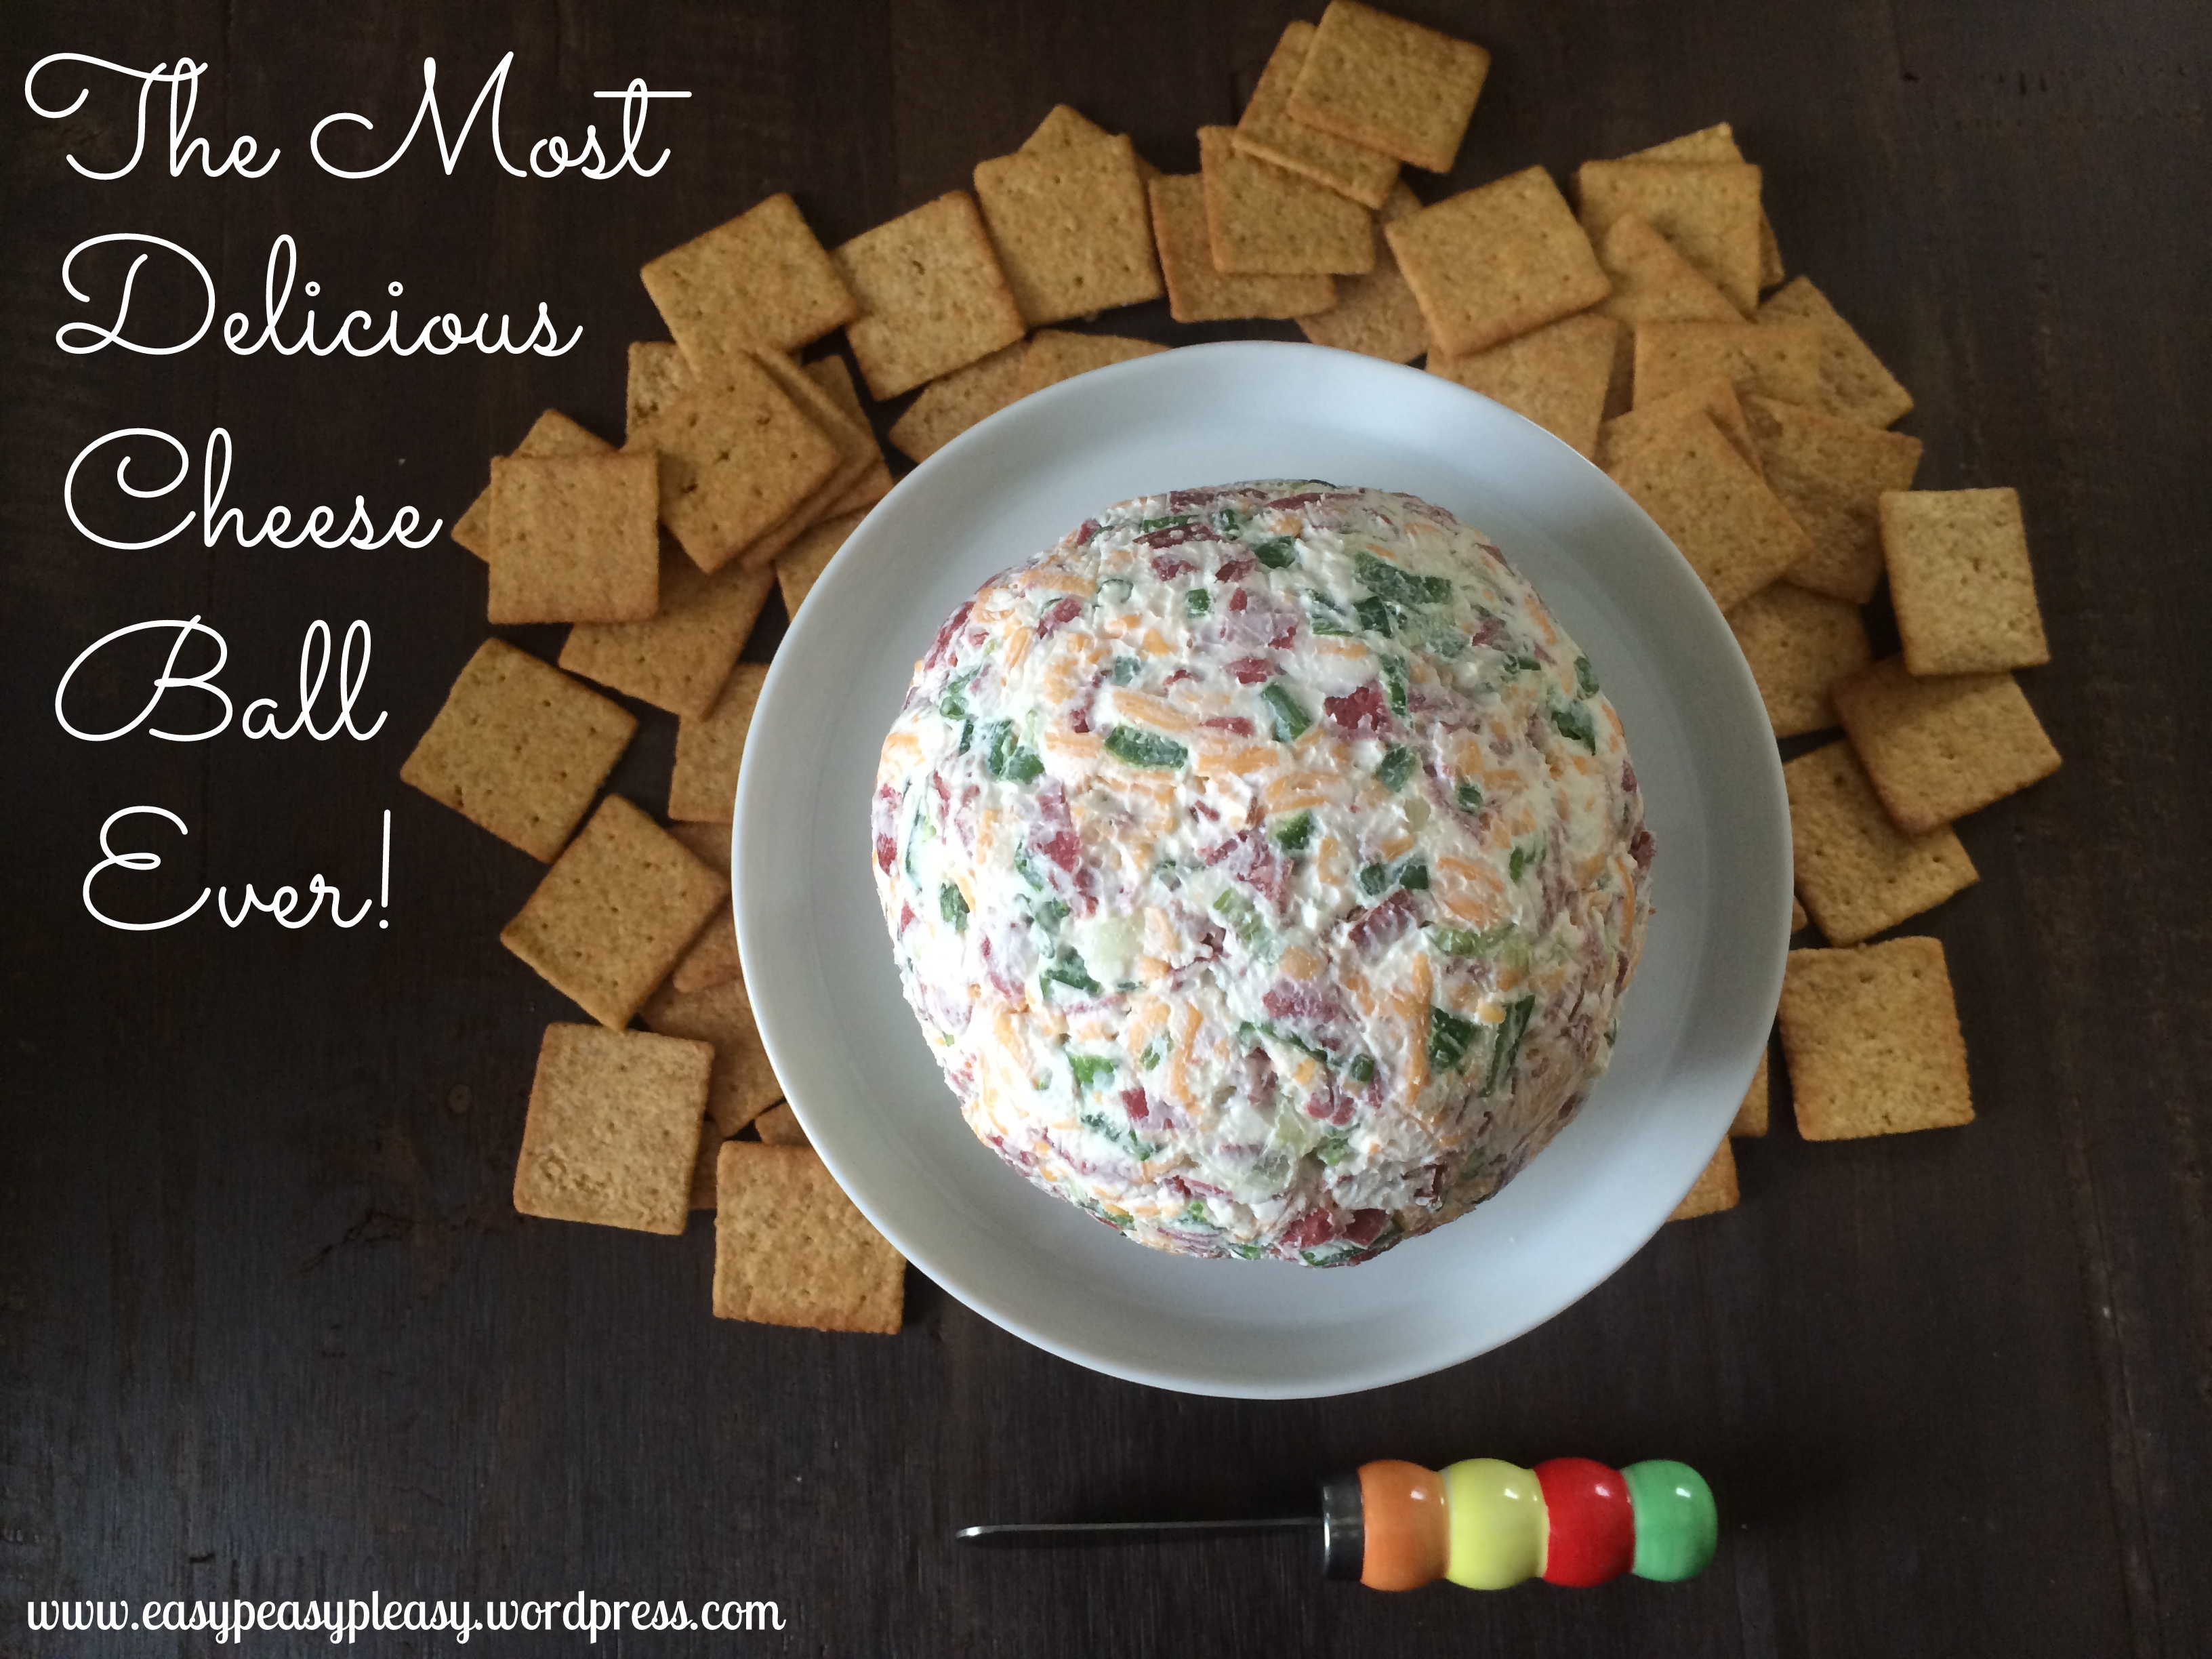 The most Delicious Cheese Ball Ever using only 4 ingredients